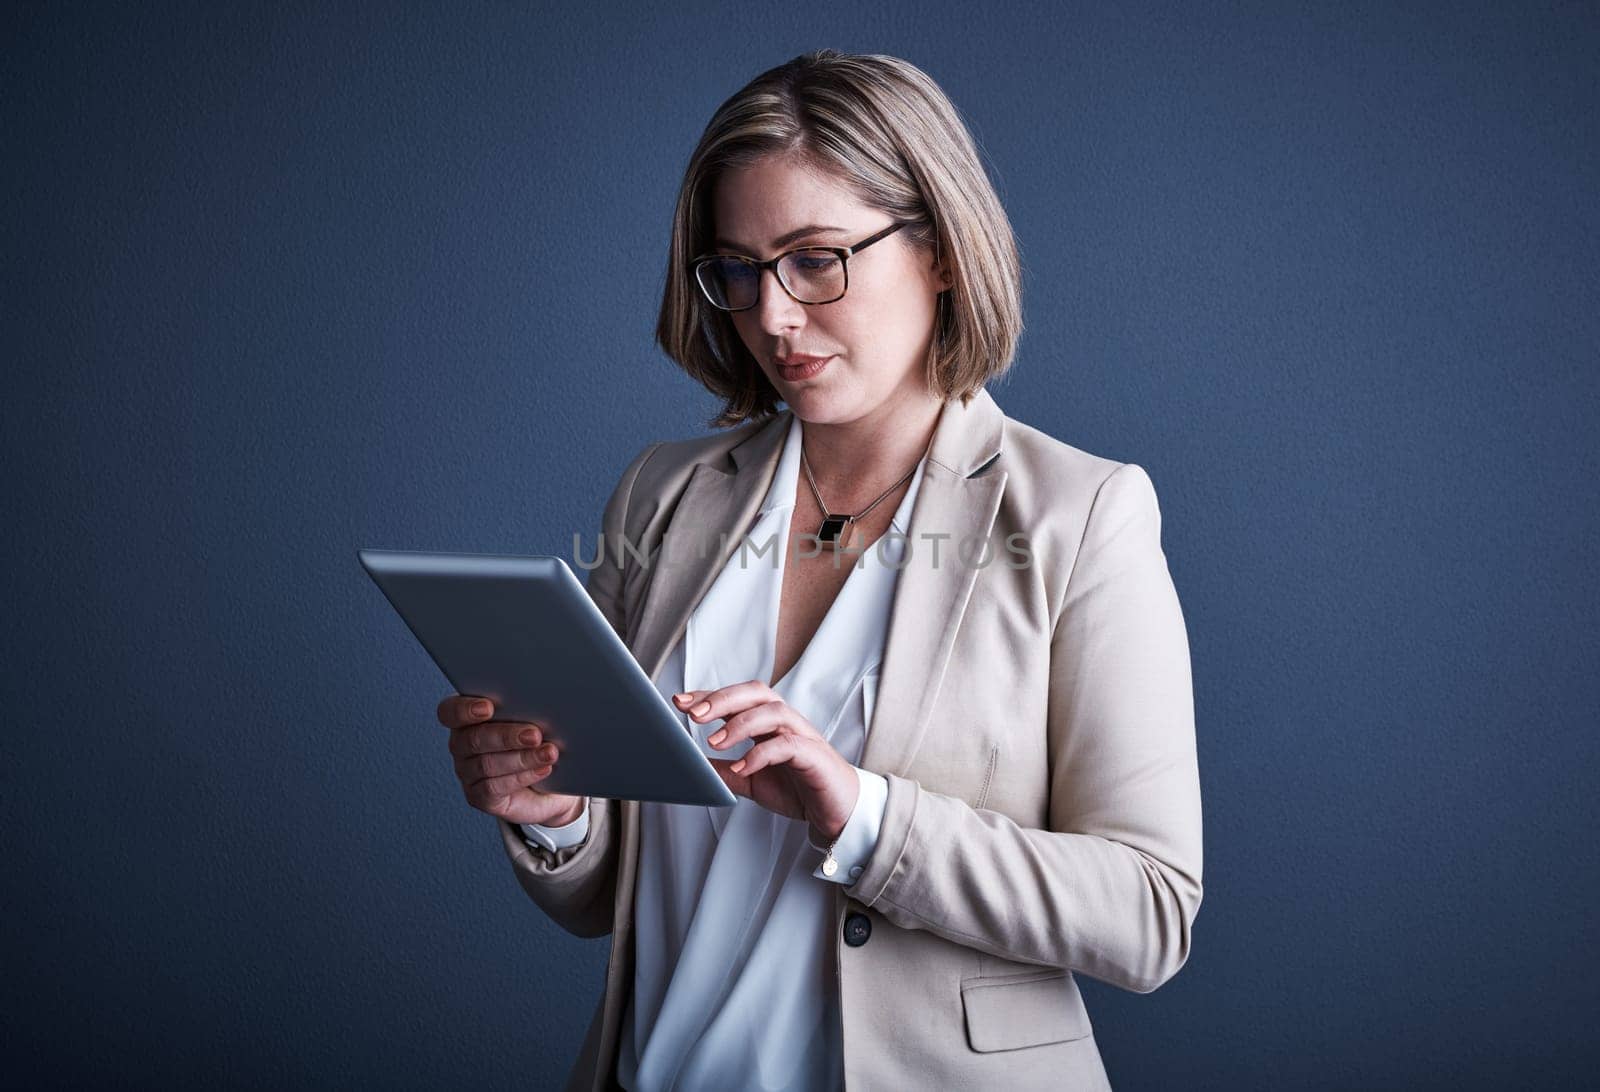 Sifting through the information. Studio shot of an attractive young corporate businesswoman using a tablet against a dark background